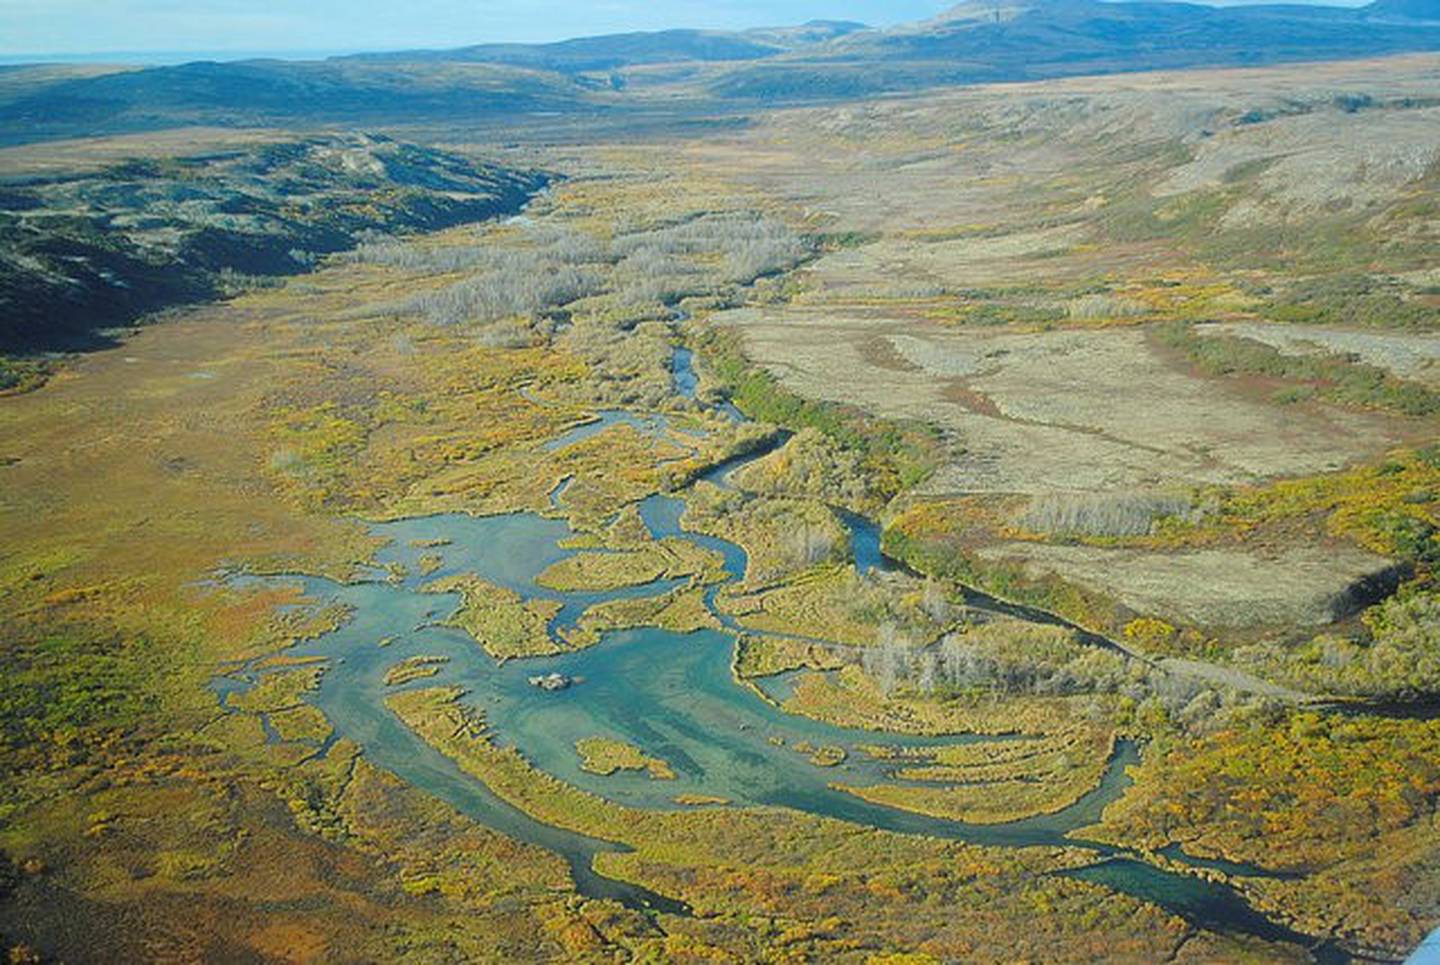 The Upper Tularik Floodplain in the Bristol Bay watershed in Alaska is seen in an undated handout picture provided by the Environmental Protection Agency (EPA). Courtesy of Environmental Protection Agency/Handout via REUTERS